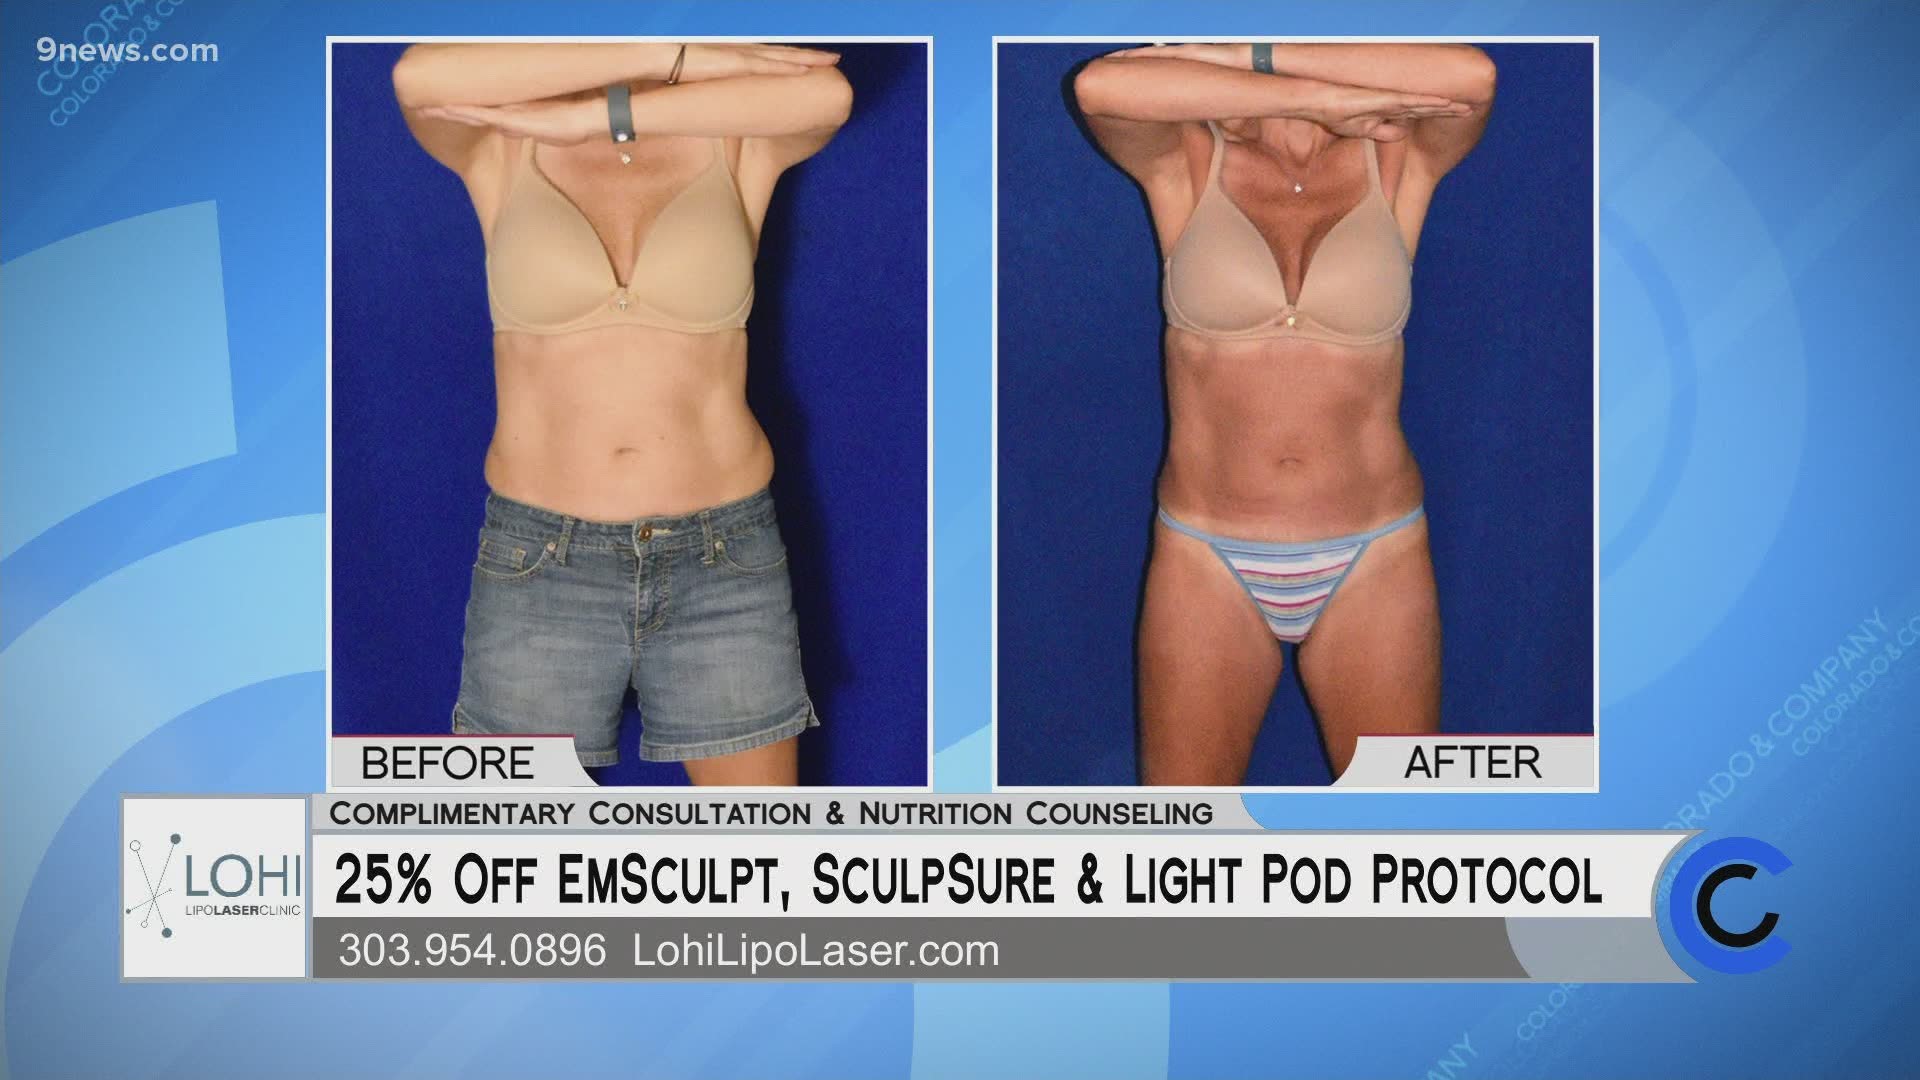 Right now you can get 25% off of 3 top technologies at Lohi Lipo Laser. Visit LohiLipoLaser.com or call 303.954.0896 to get started today.